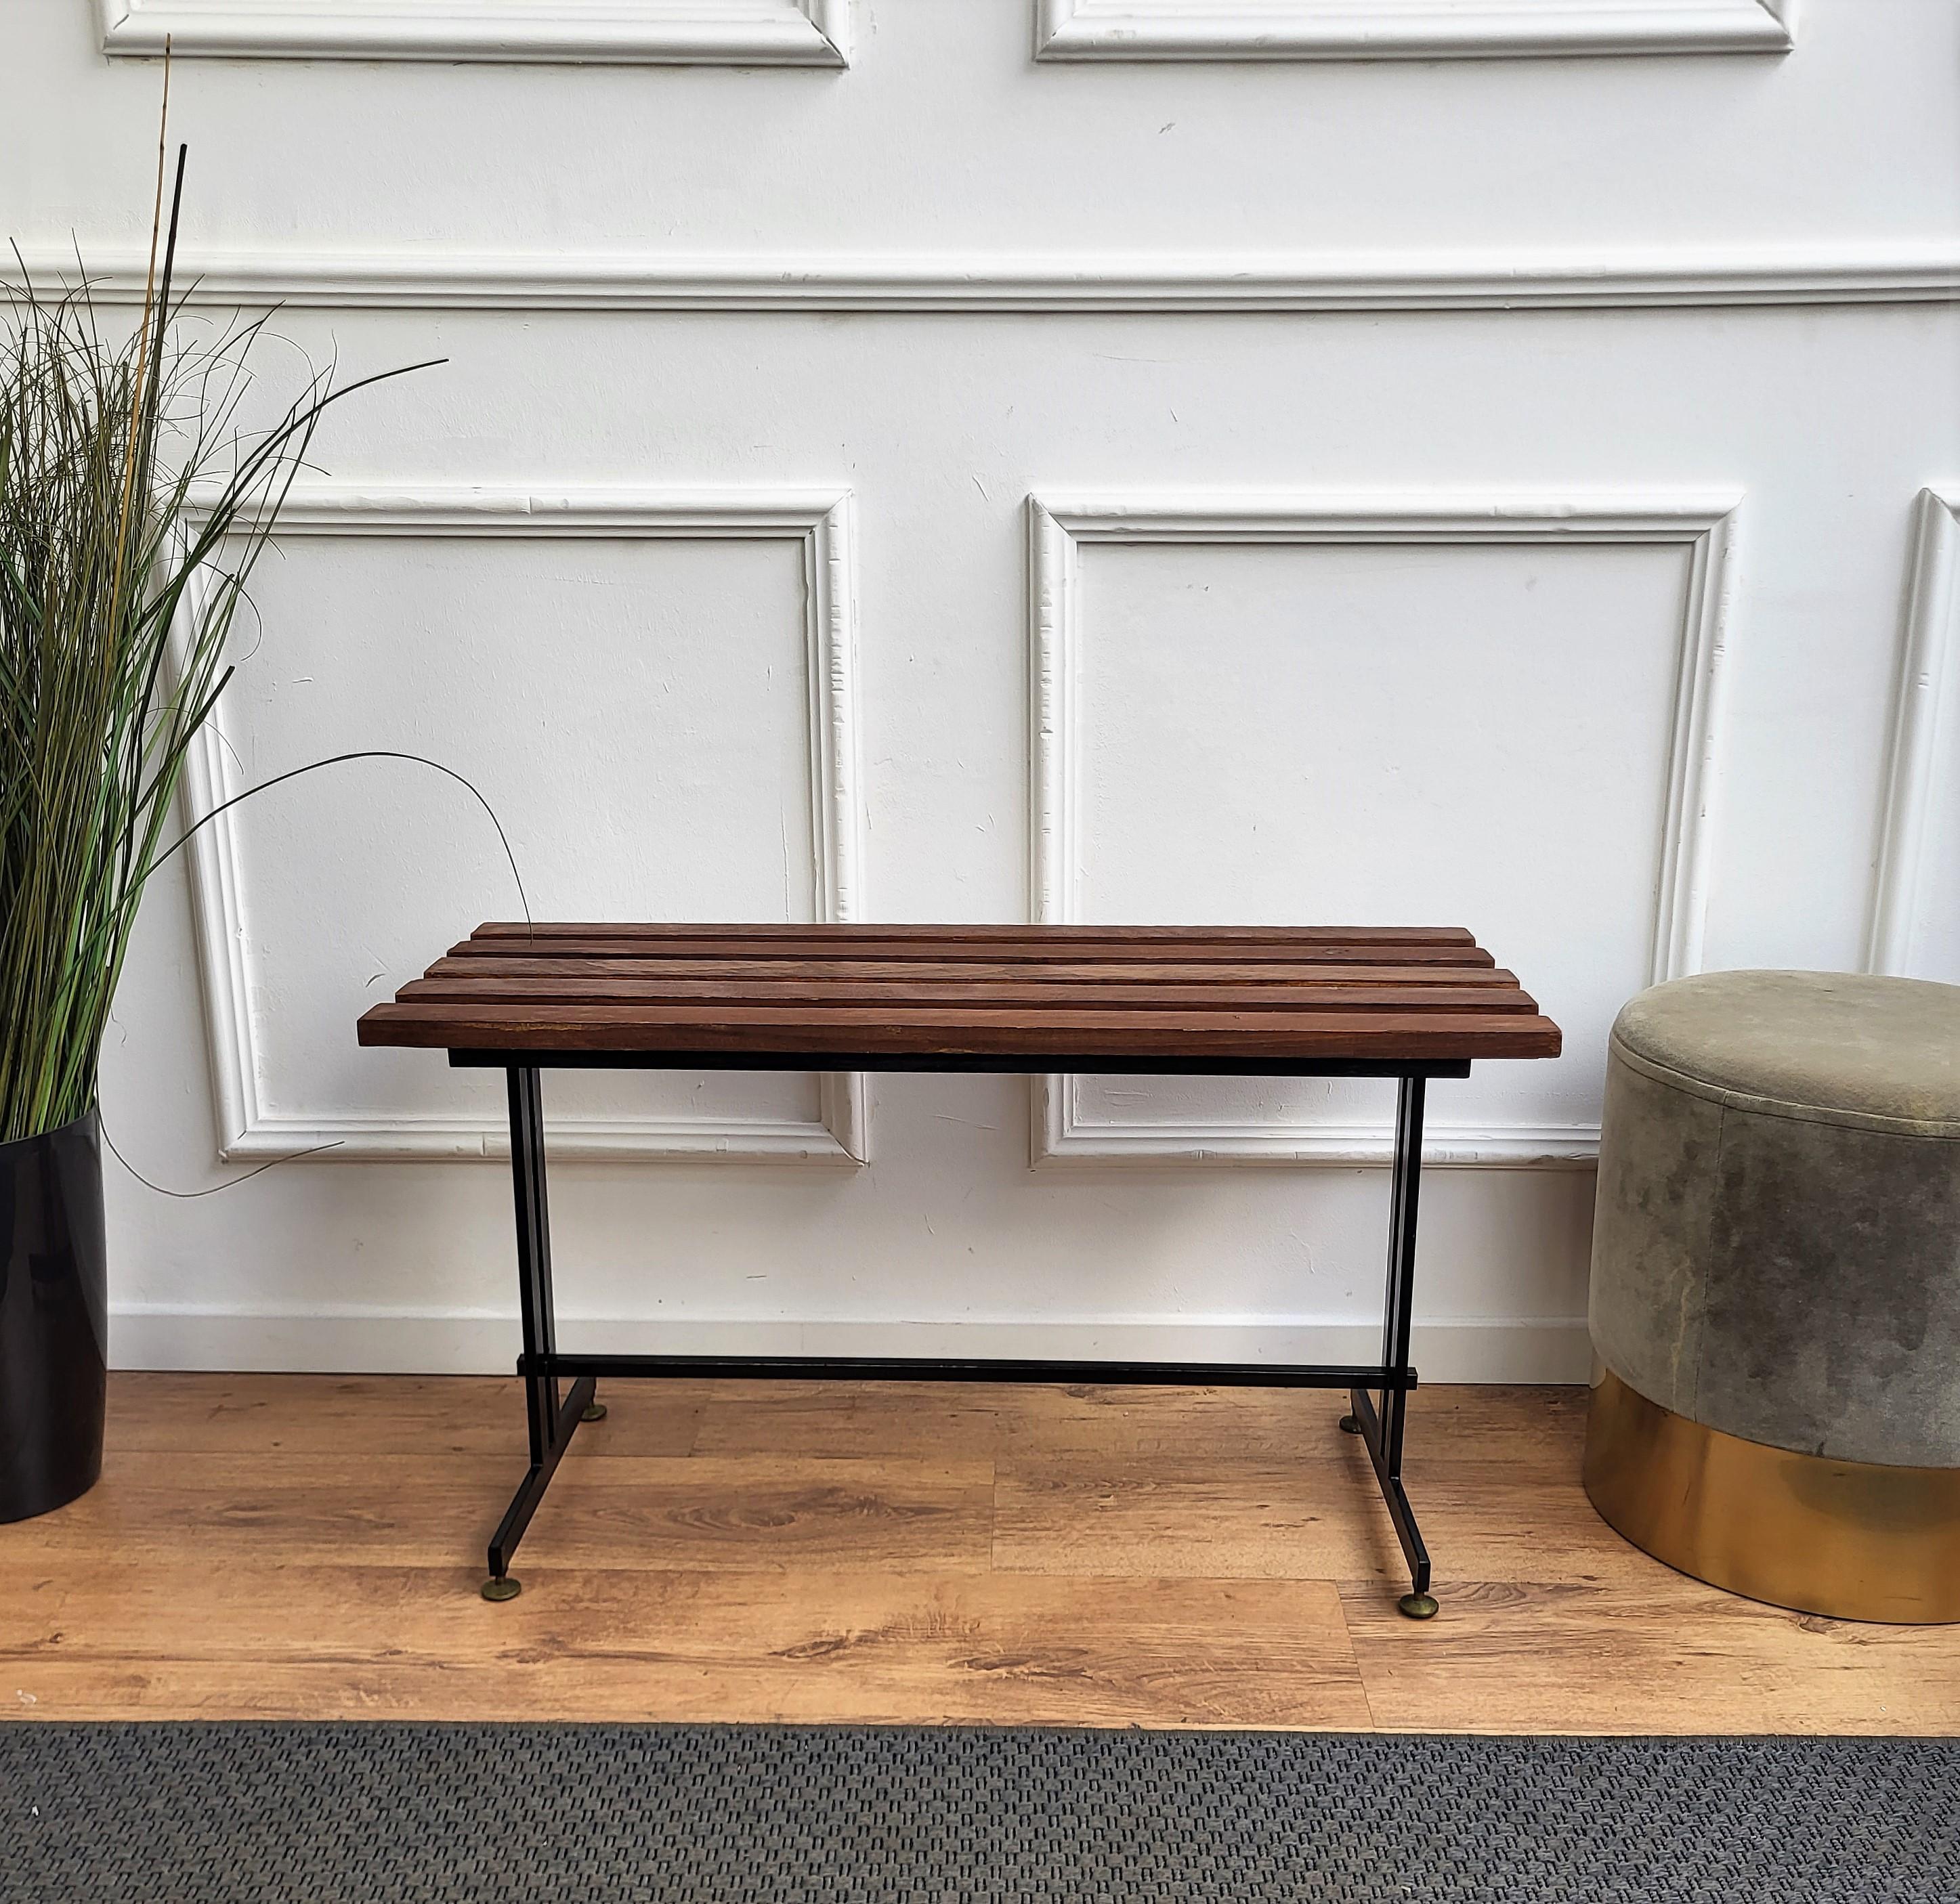 Italian Mid-Century Modern platform slat bench with wood slated top sitting on black metal base and nice brass foot-ends. The perfect piece for a house or building with large expansive windows or a long entrance way for seating or can be used as a